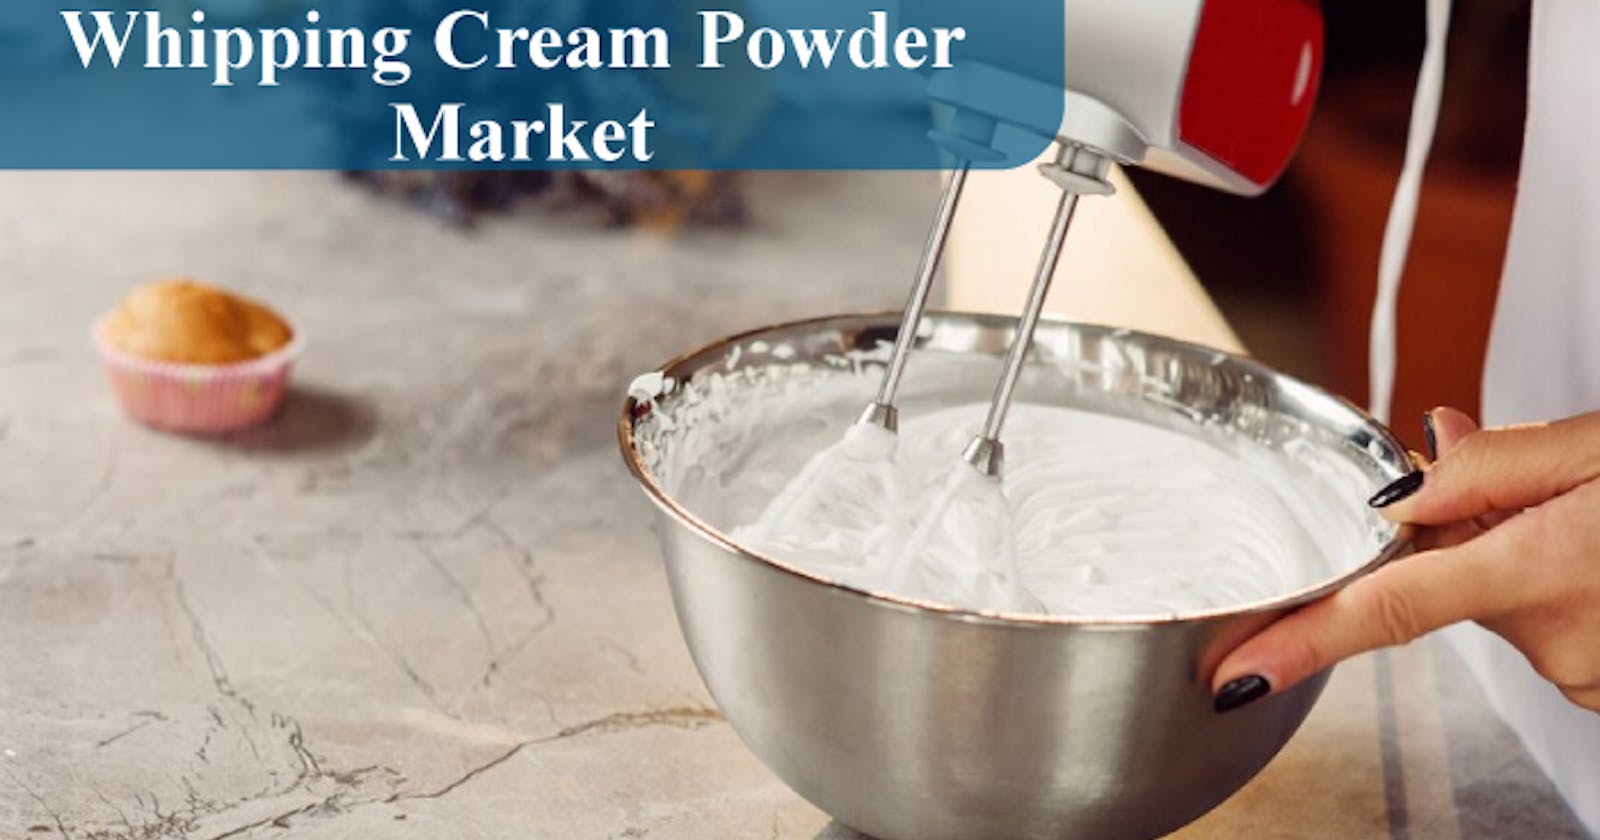 Global Whipping Cream Powder Market Projected to Exhibit Significant Growth with a CAGR of 8% from 2023 to 2030